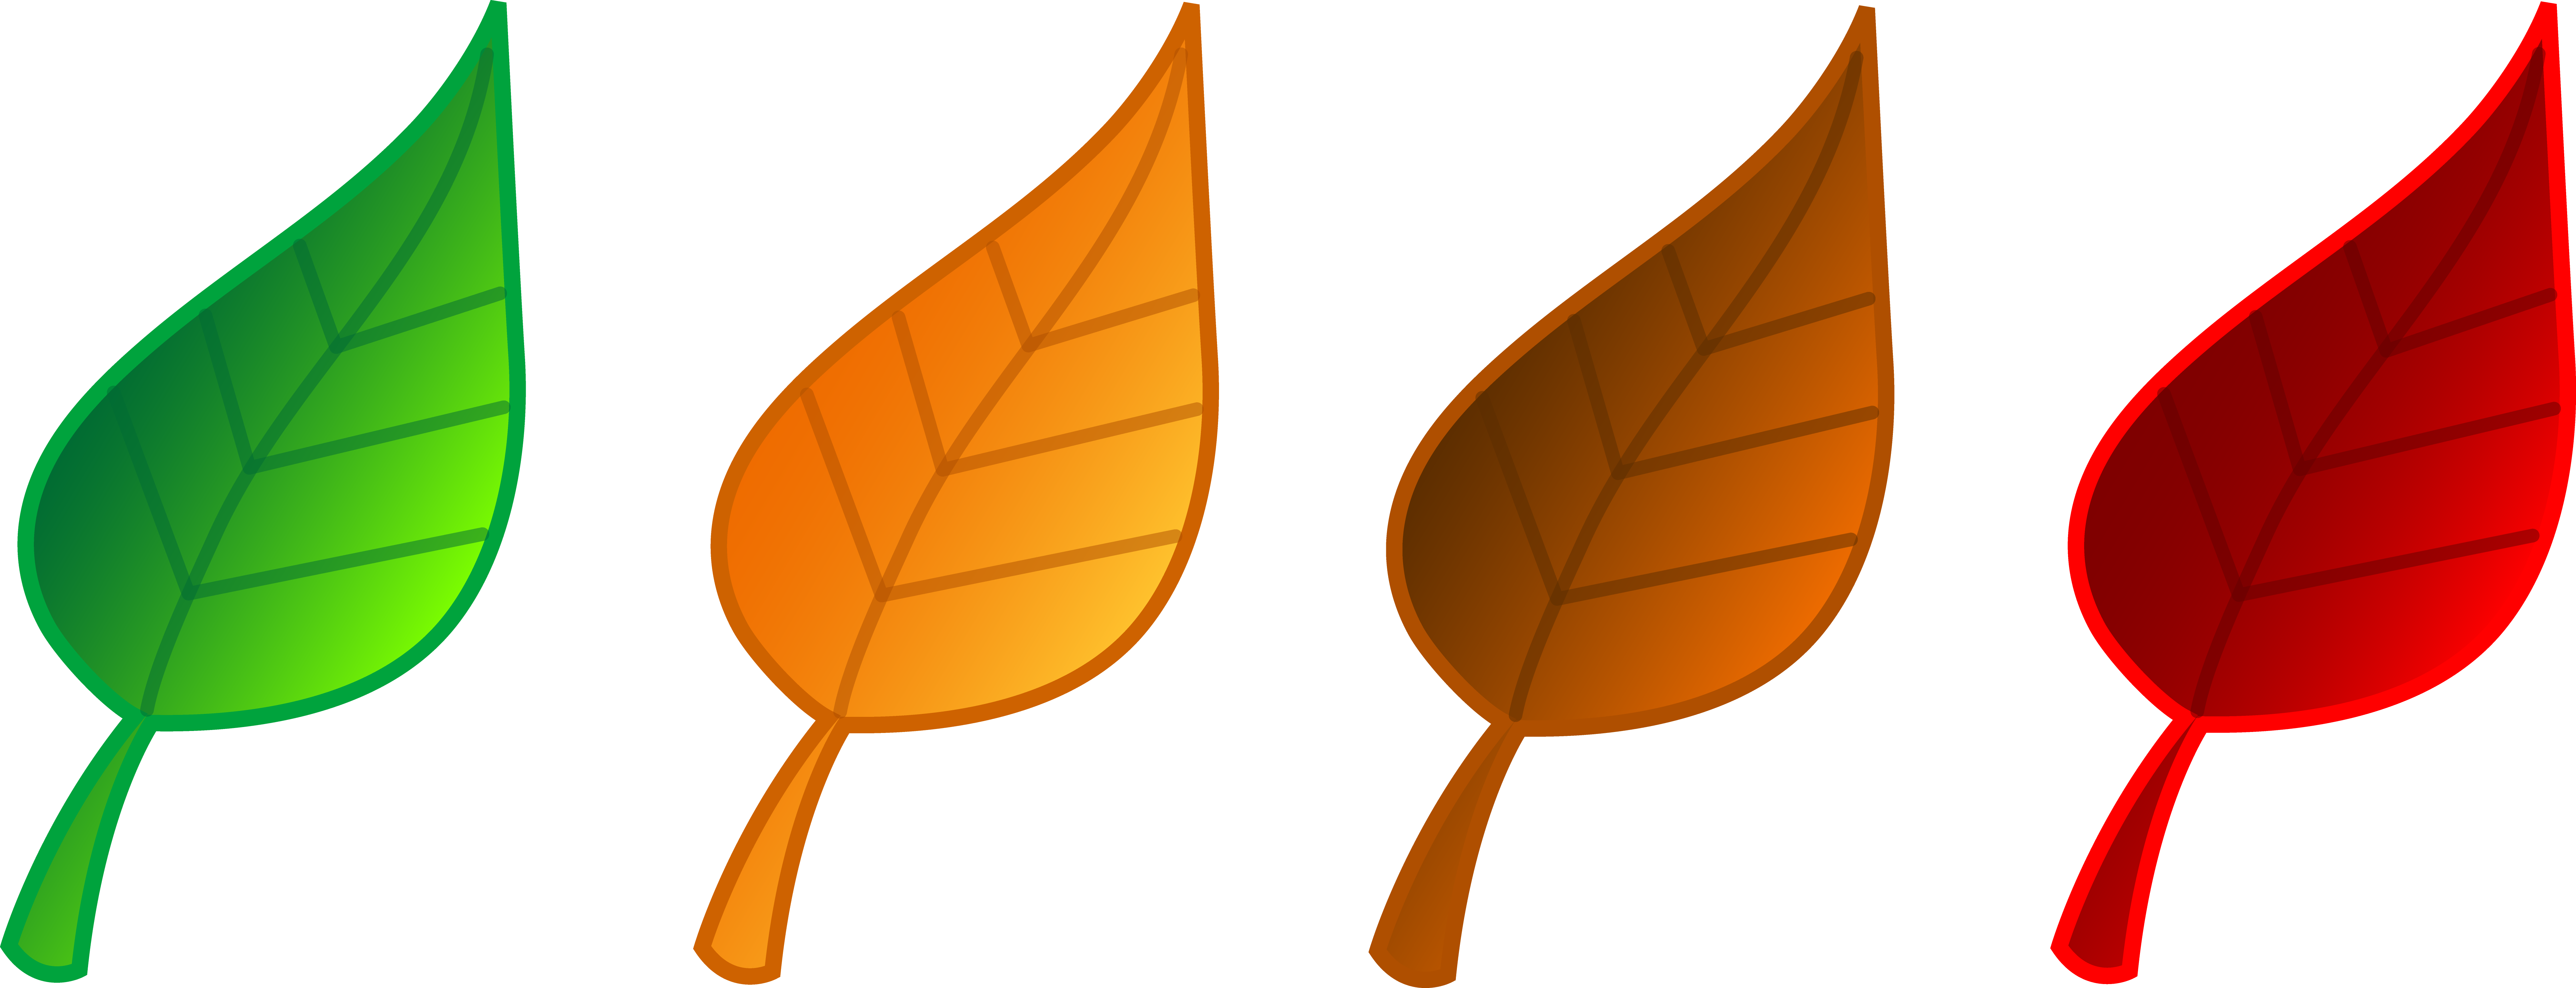 clip art of leaves free - photo #38